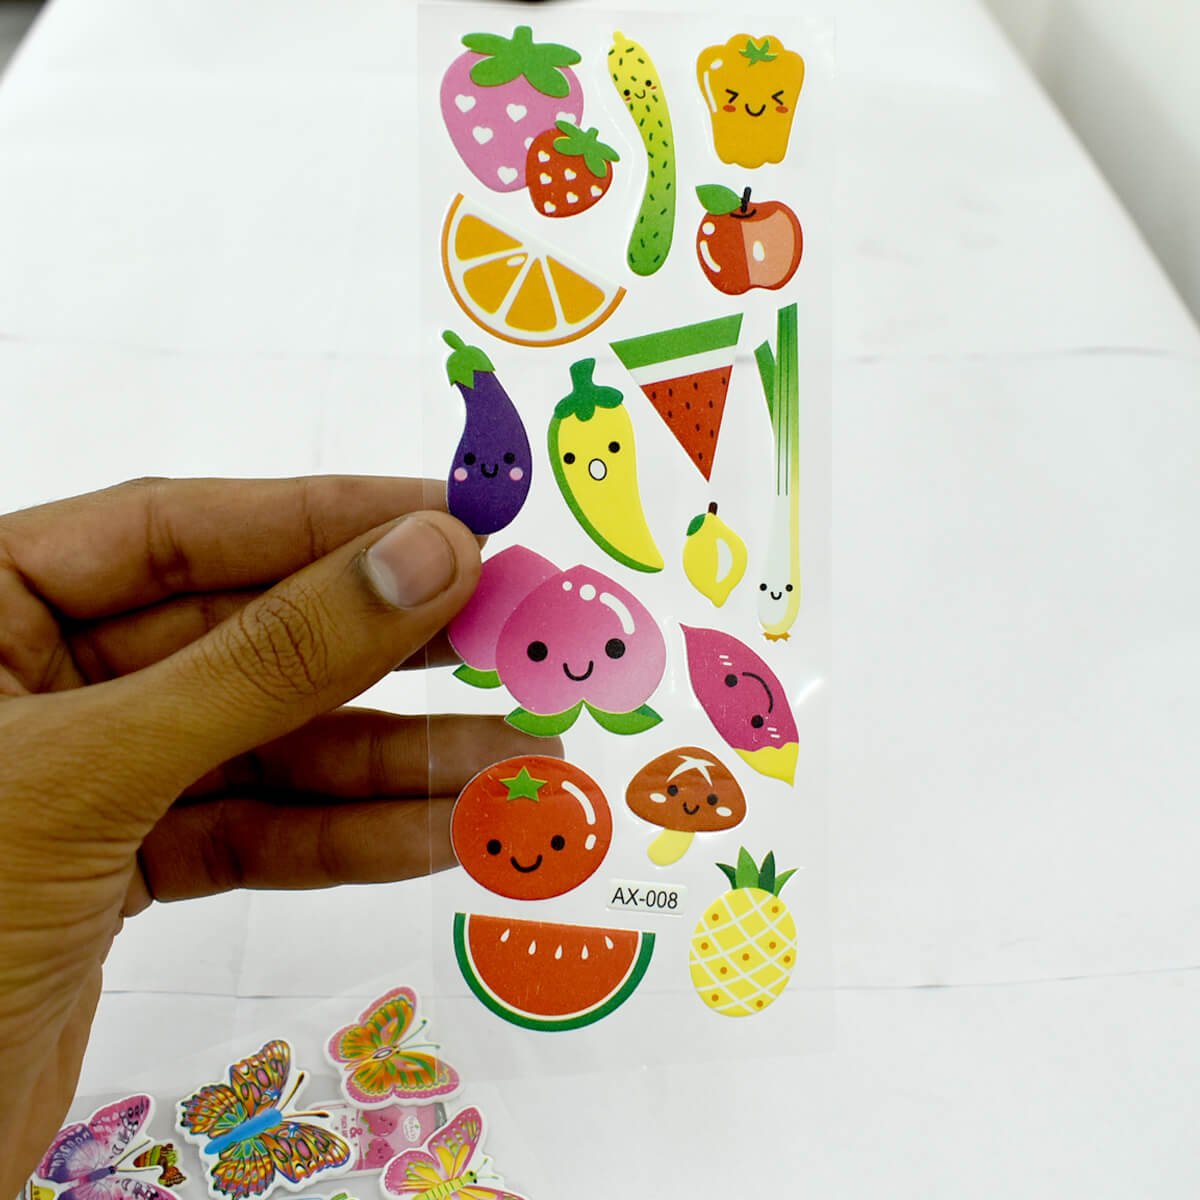 Stickers for student, projects, art & craft, decoration - Raipurshop